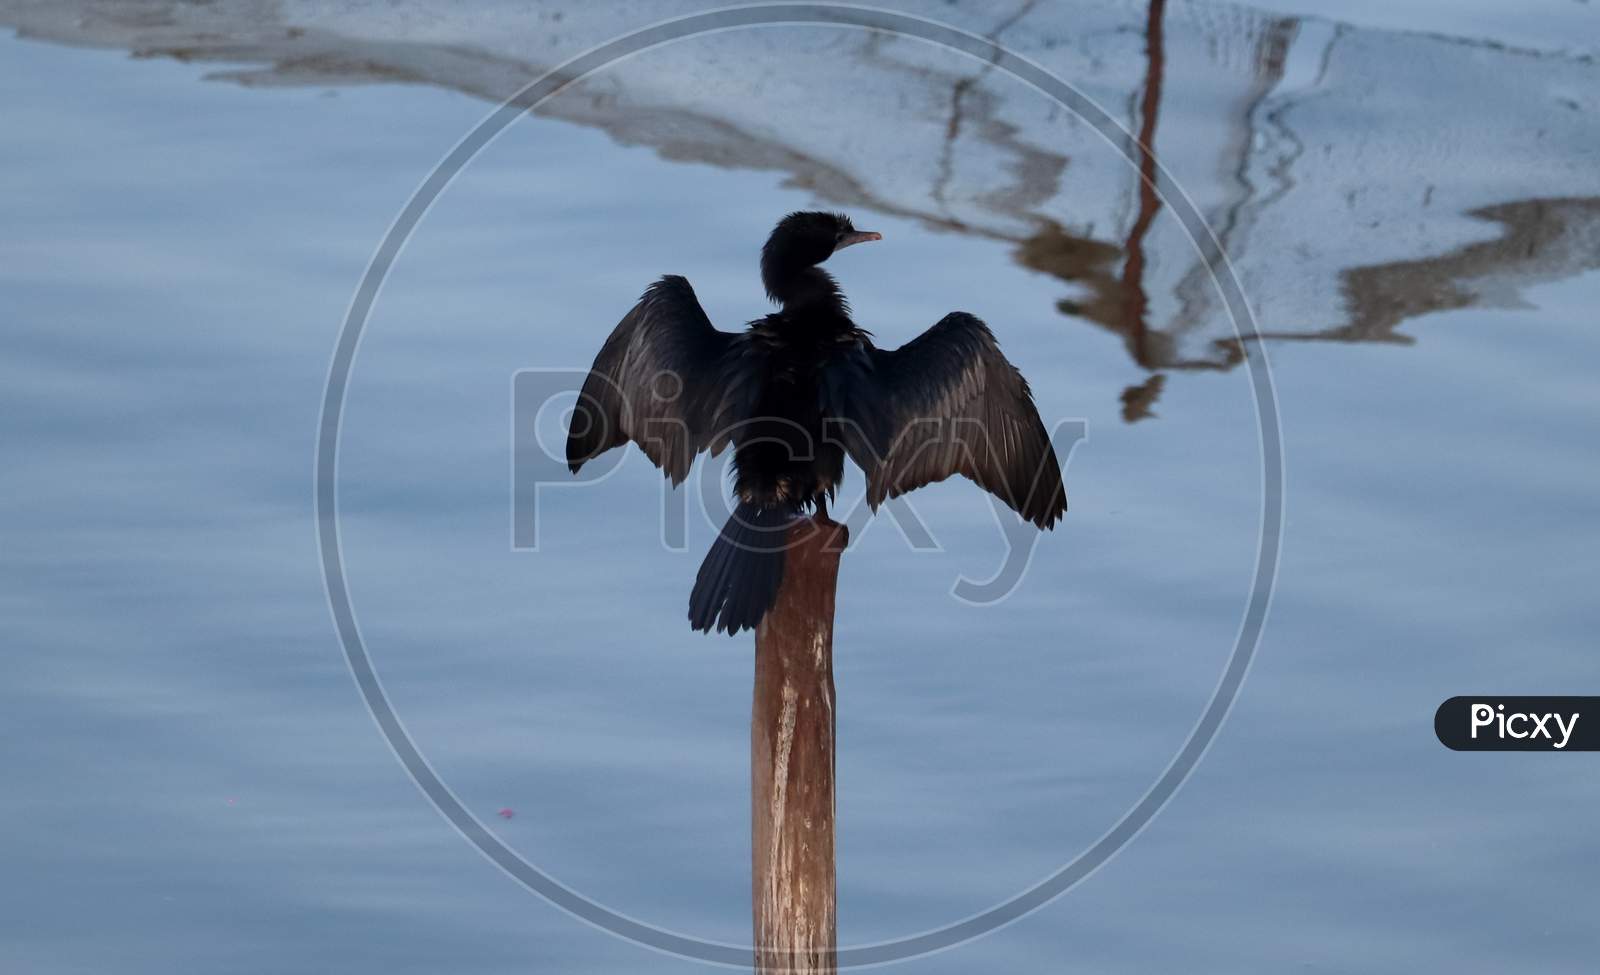 A Black Cormorant Bird Sitting On A Dry Wooden Stick With Its Wings Spread